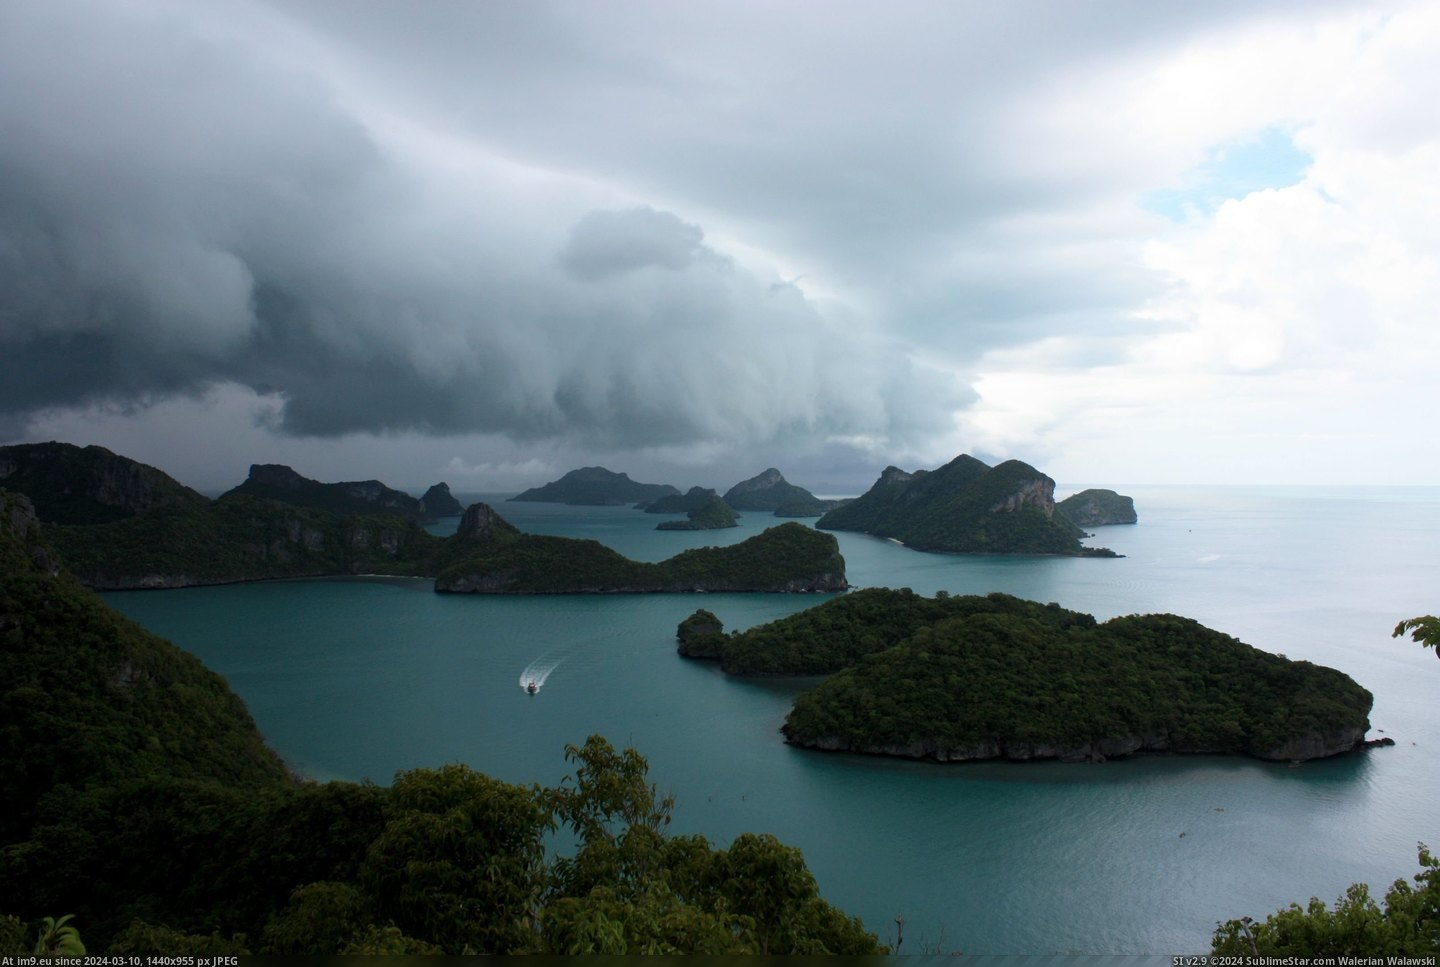 #Picture #National #Favourite #Rain #Incoming #Backpacked #Ang #Thong #Thailand #Marine #Waited [Earthporn] [OC] Backpacked in Thailand, waited for the incoming rain to take my favourite picture. Ang Thong Marine National Pa Pic. (Obraz z album My r/EARTHPORN favs))